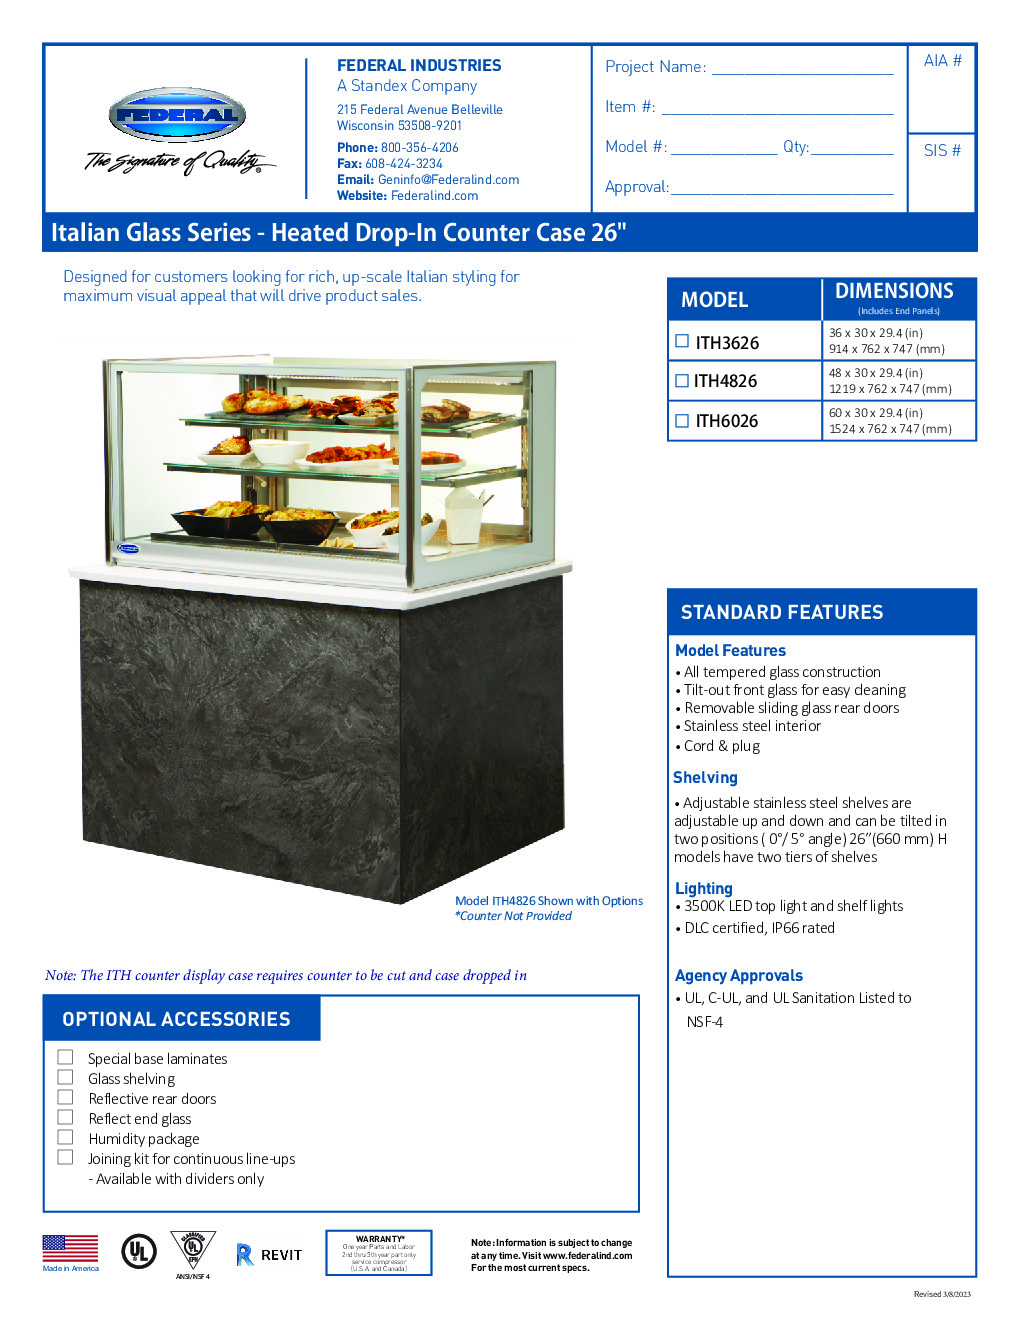 Federal Industries ITH4826 Drop-In Heated Display Case